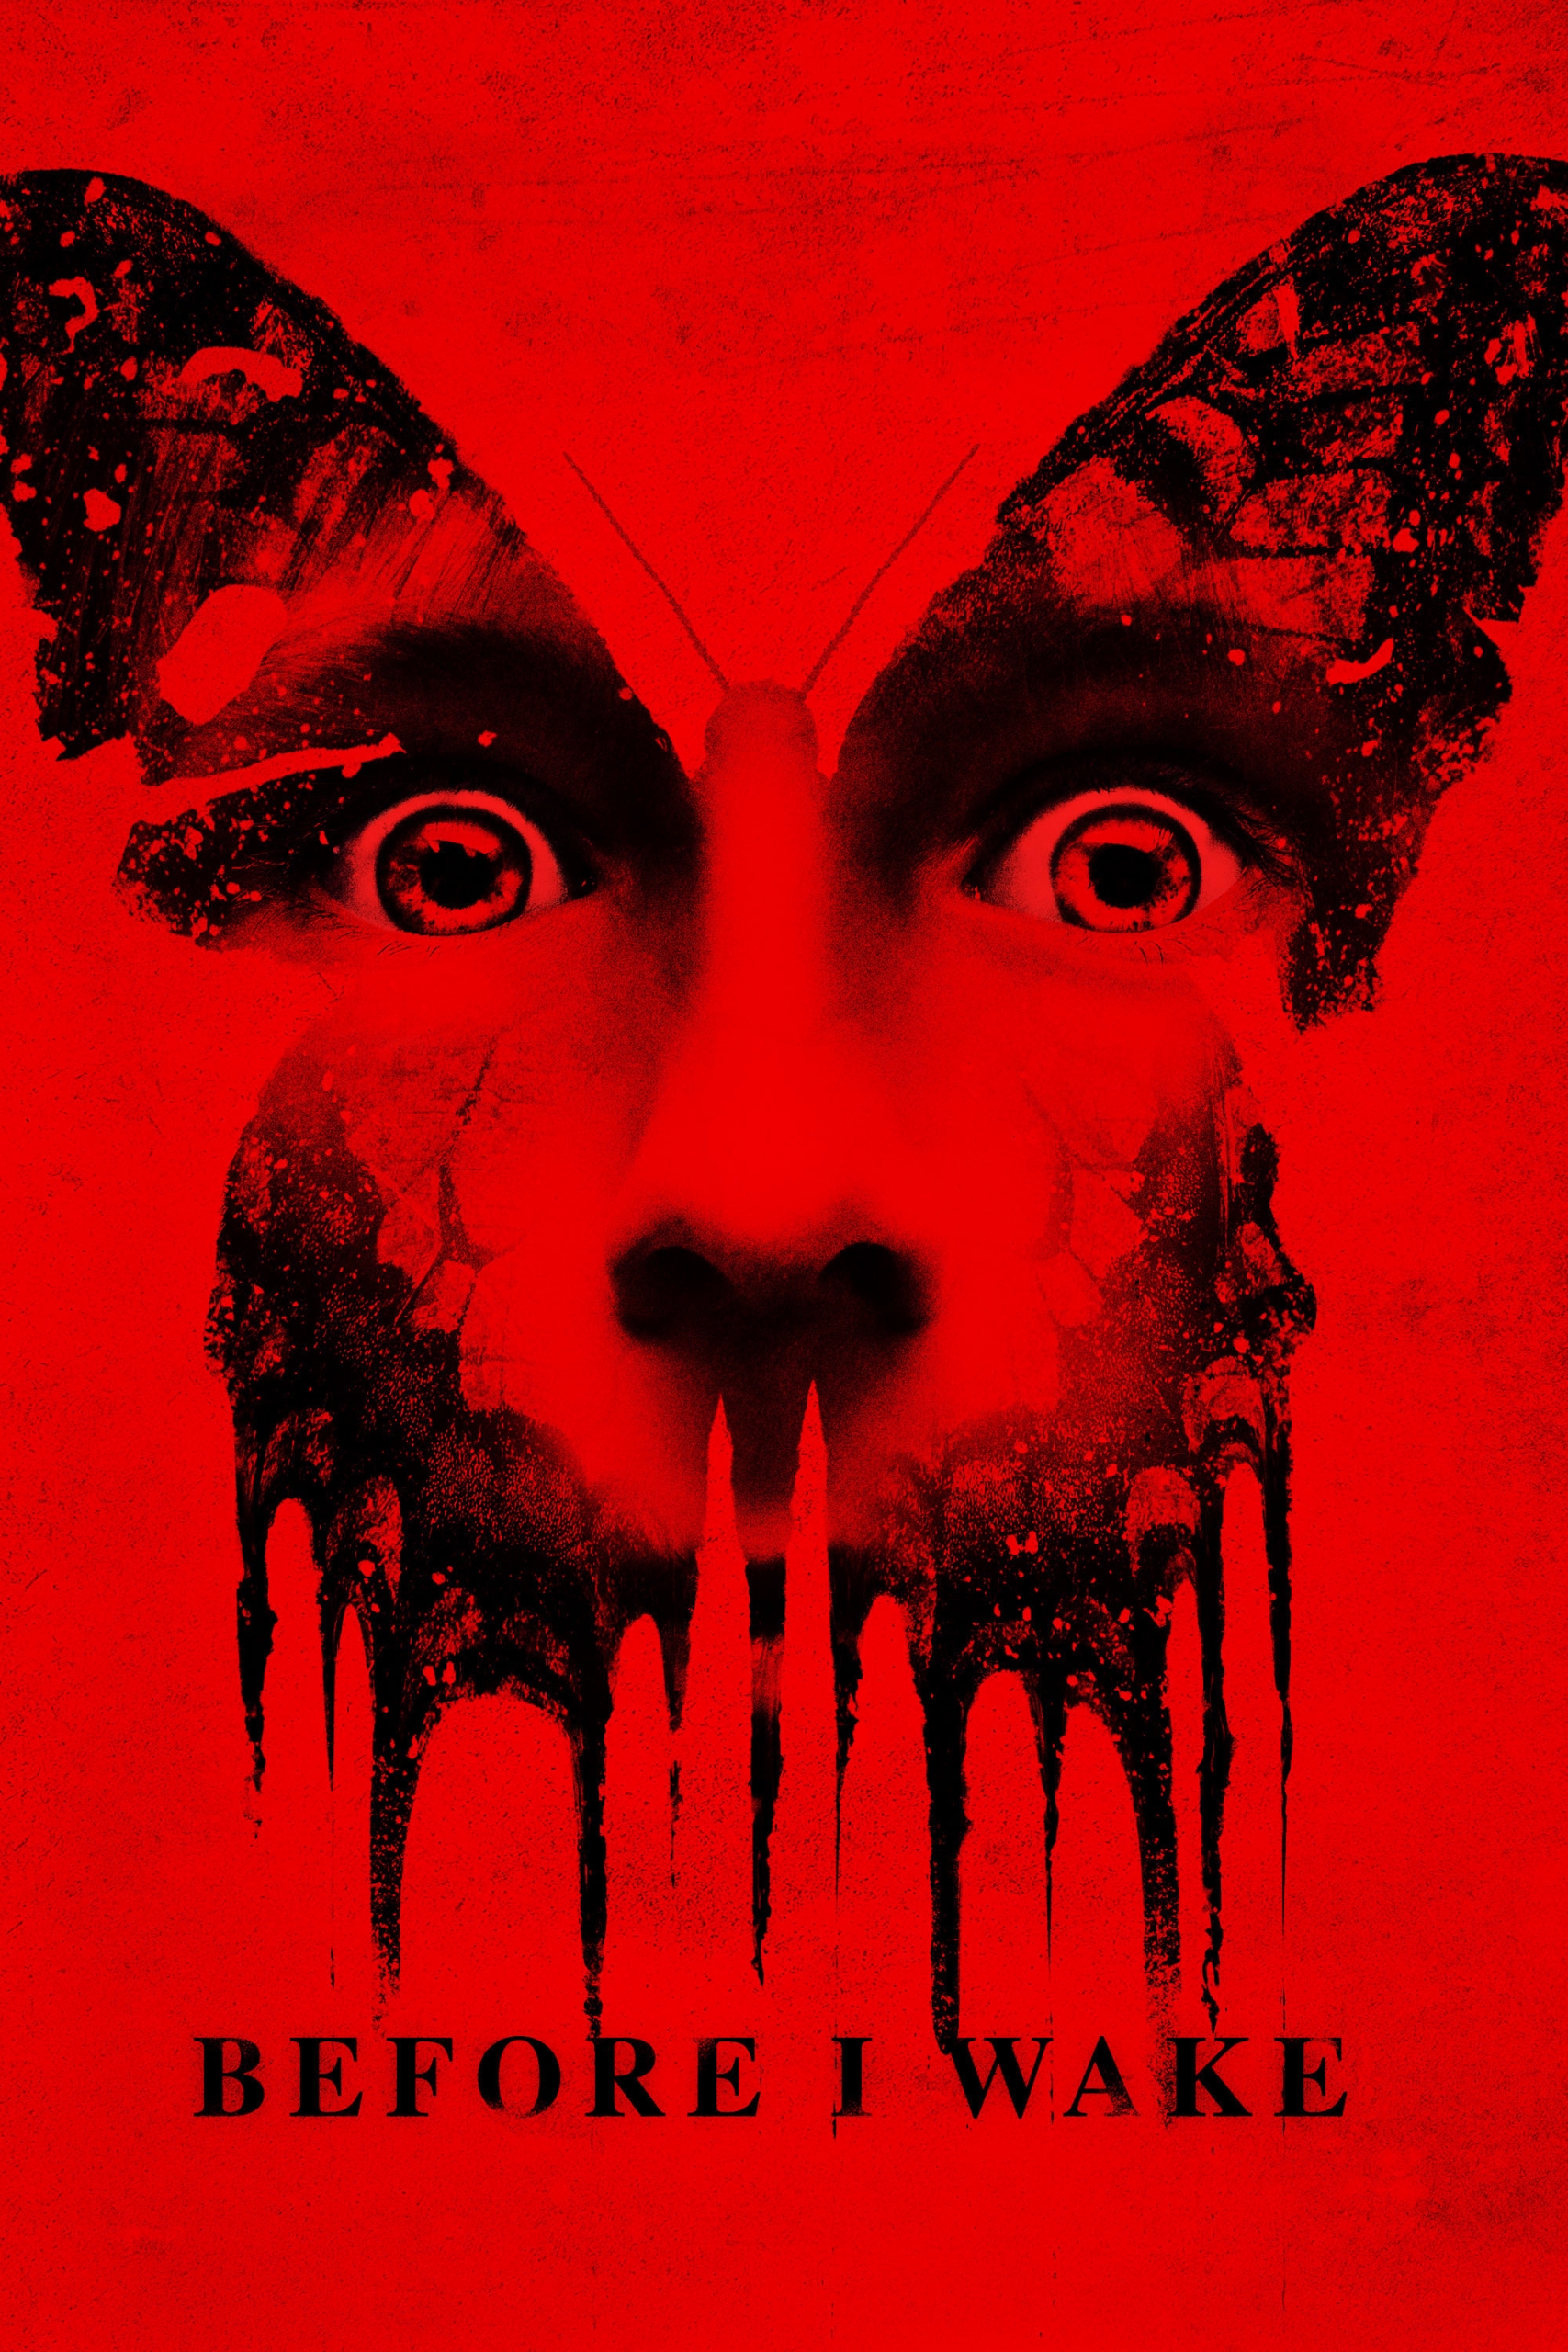 Poster for the movie "Before I Wake"